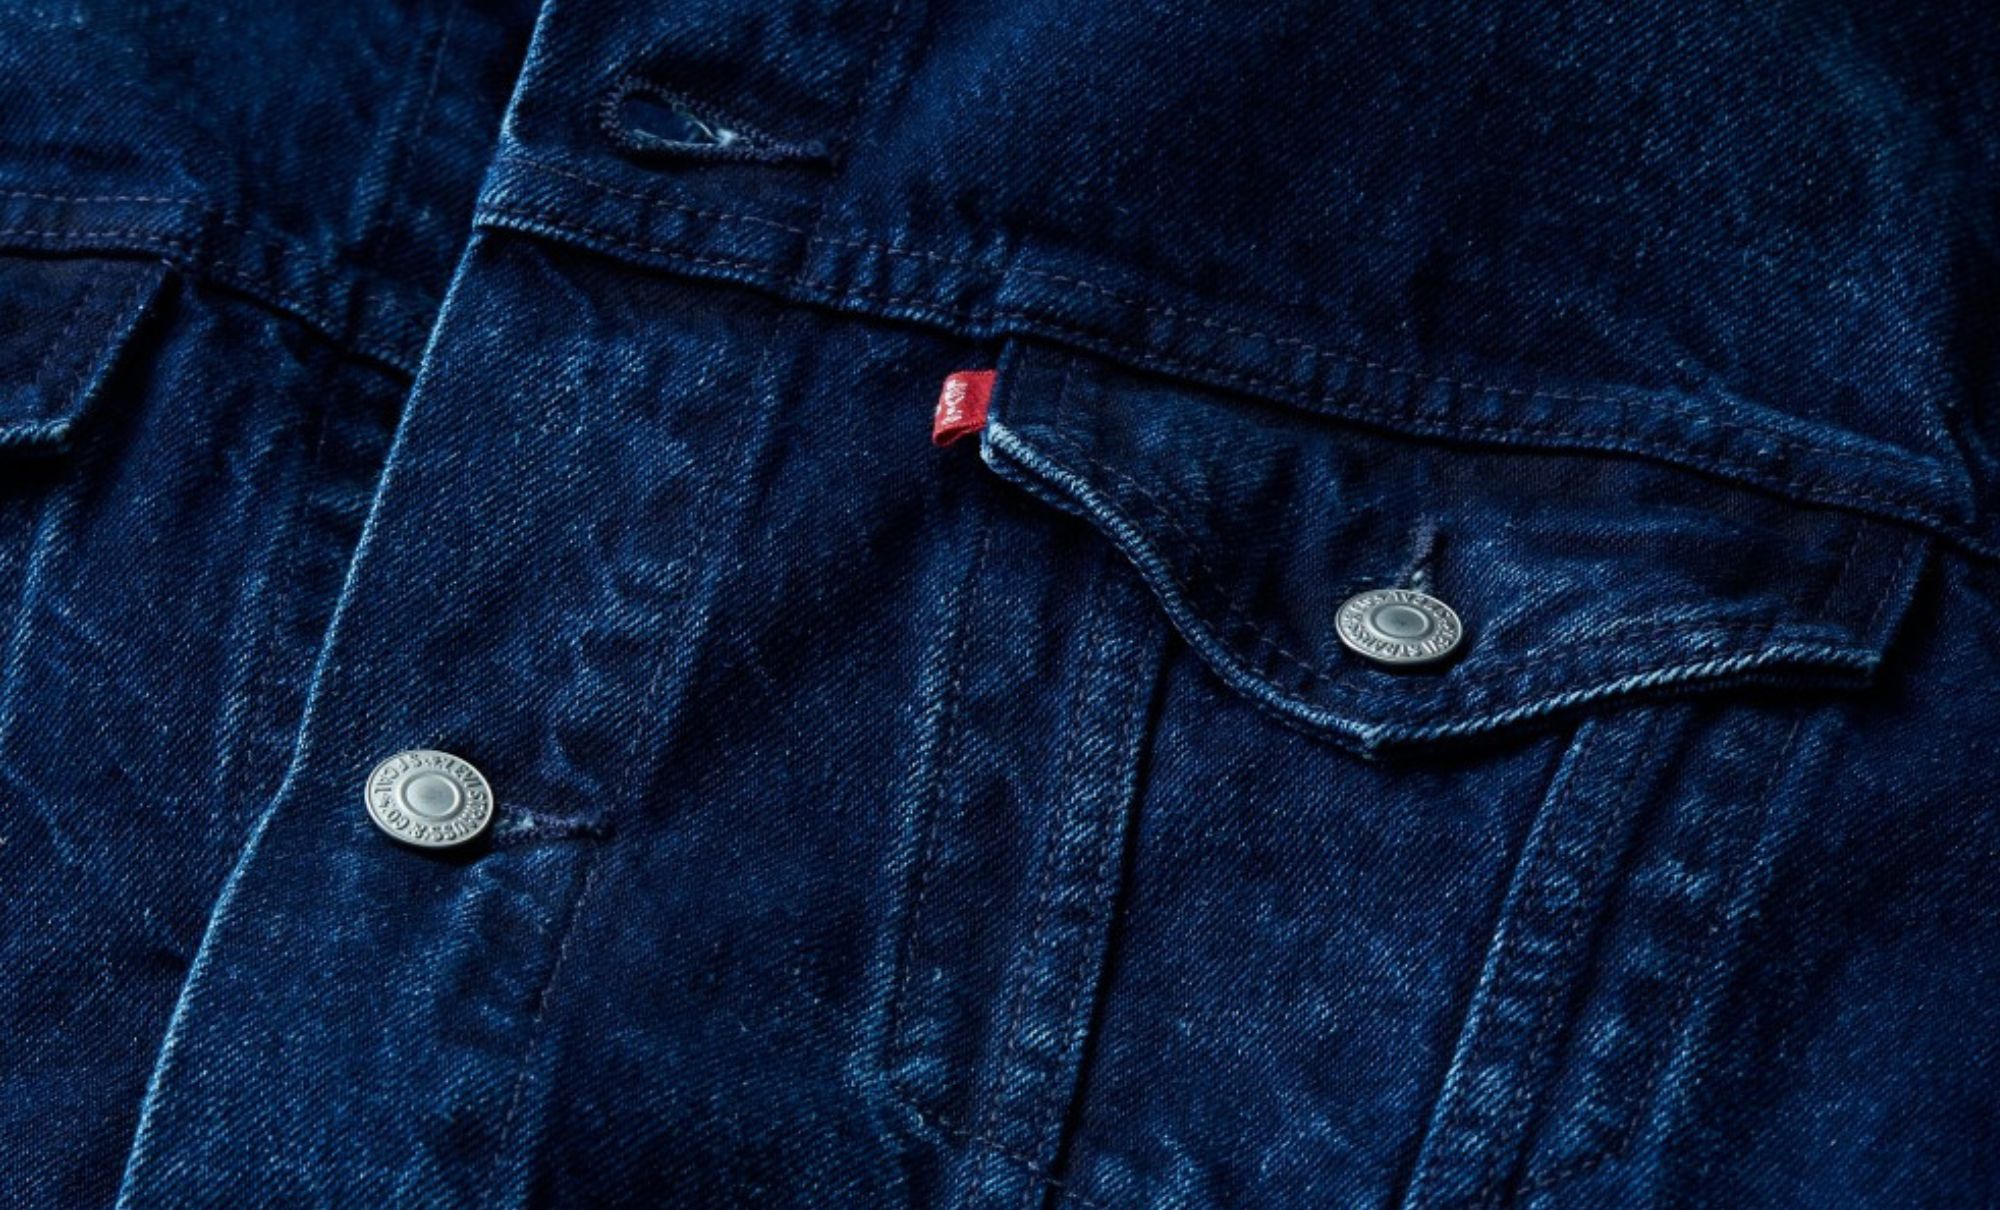 Investing in Natural Indigo at Scale - Levi Strauss & Co : Levi